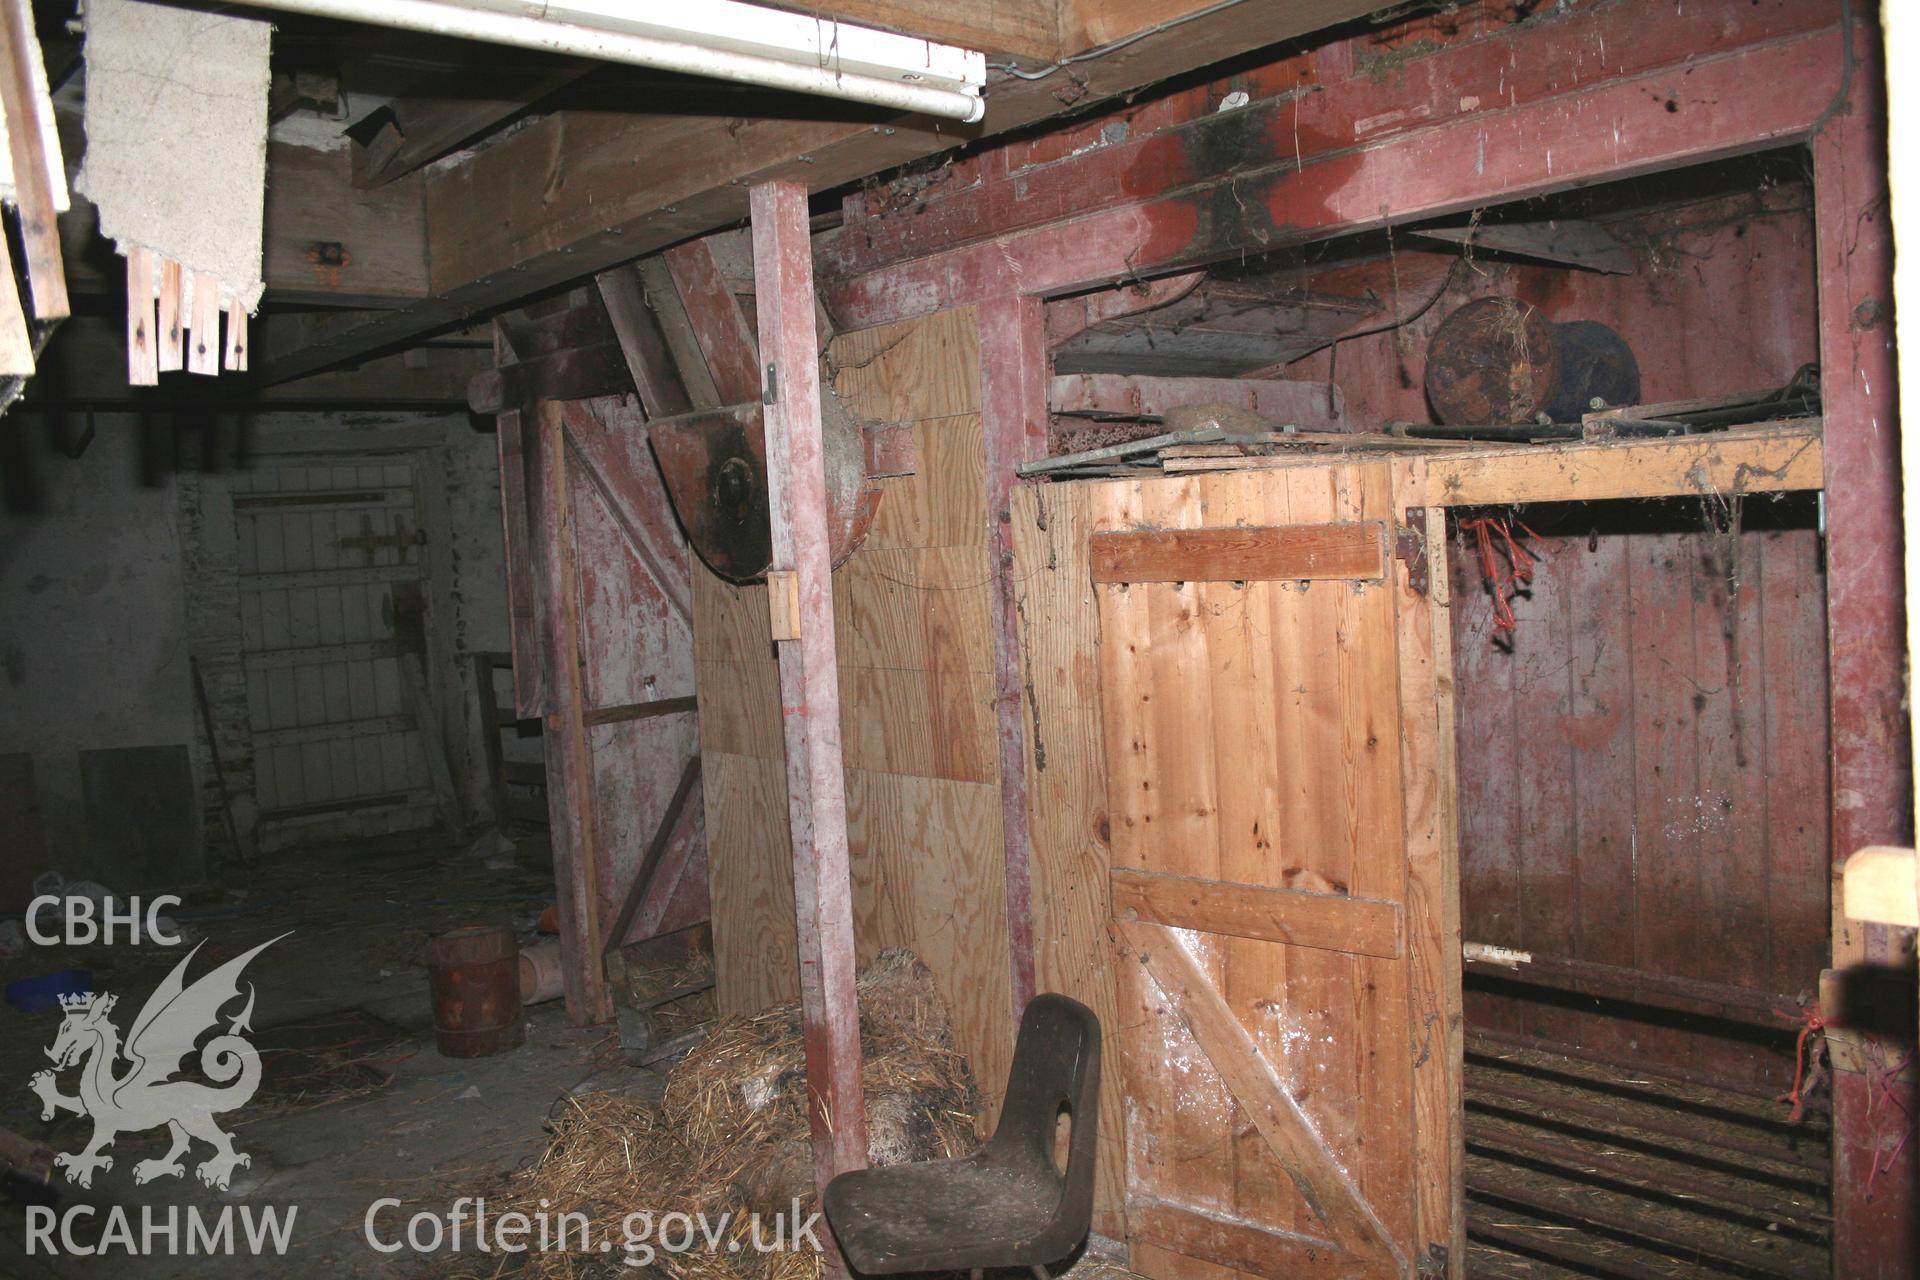 Interior view of threshing house. Photographic survey of the threshing machine in the threshing house at Tan-y-Graig Farm, Llanfarian. Conducted by Geoff Ward and John Wiles 11th December 2016.